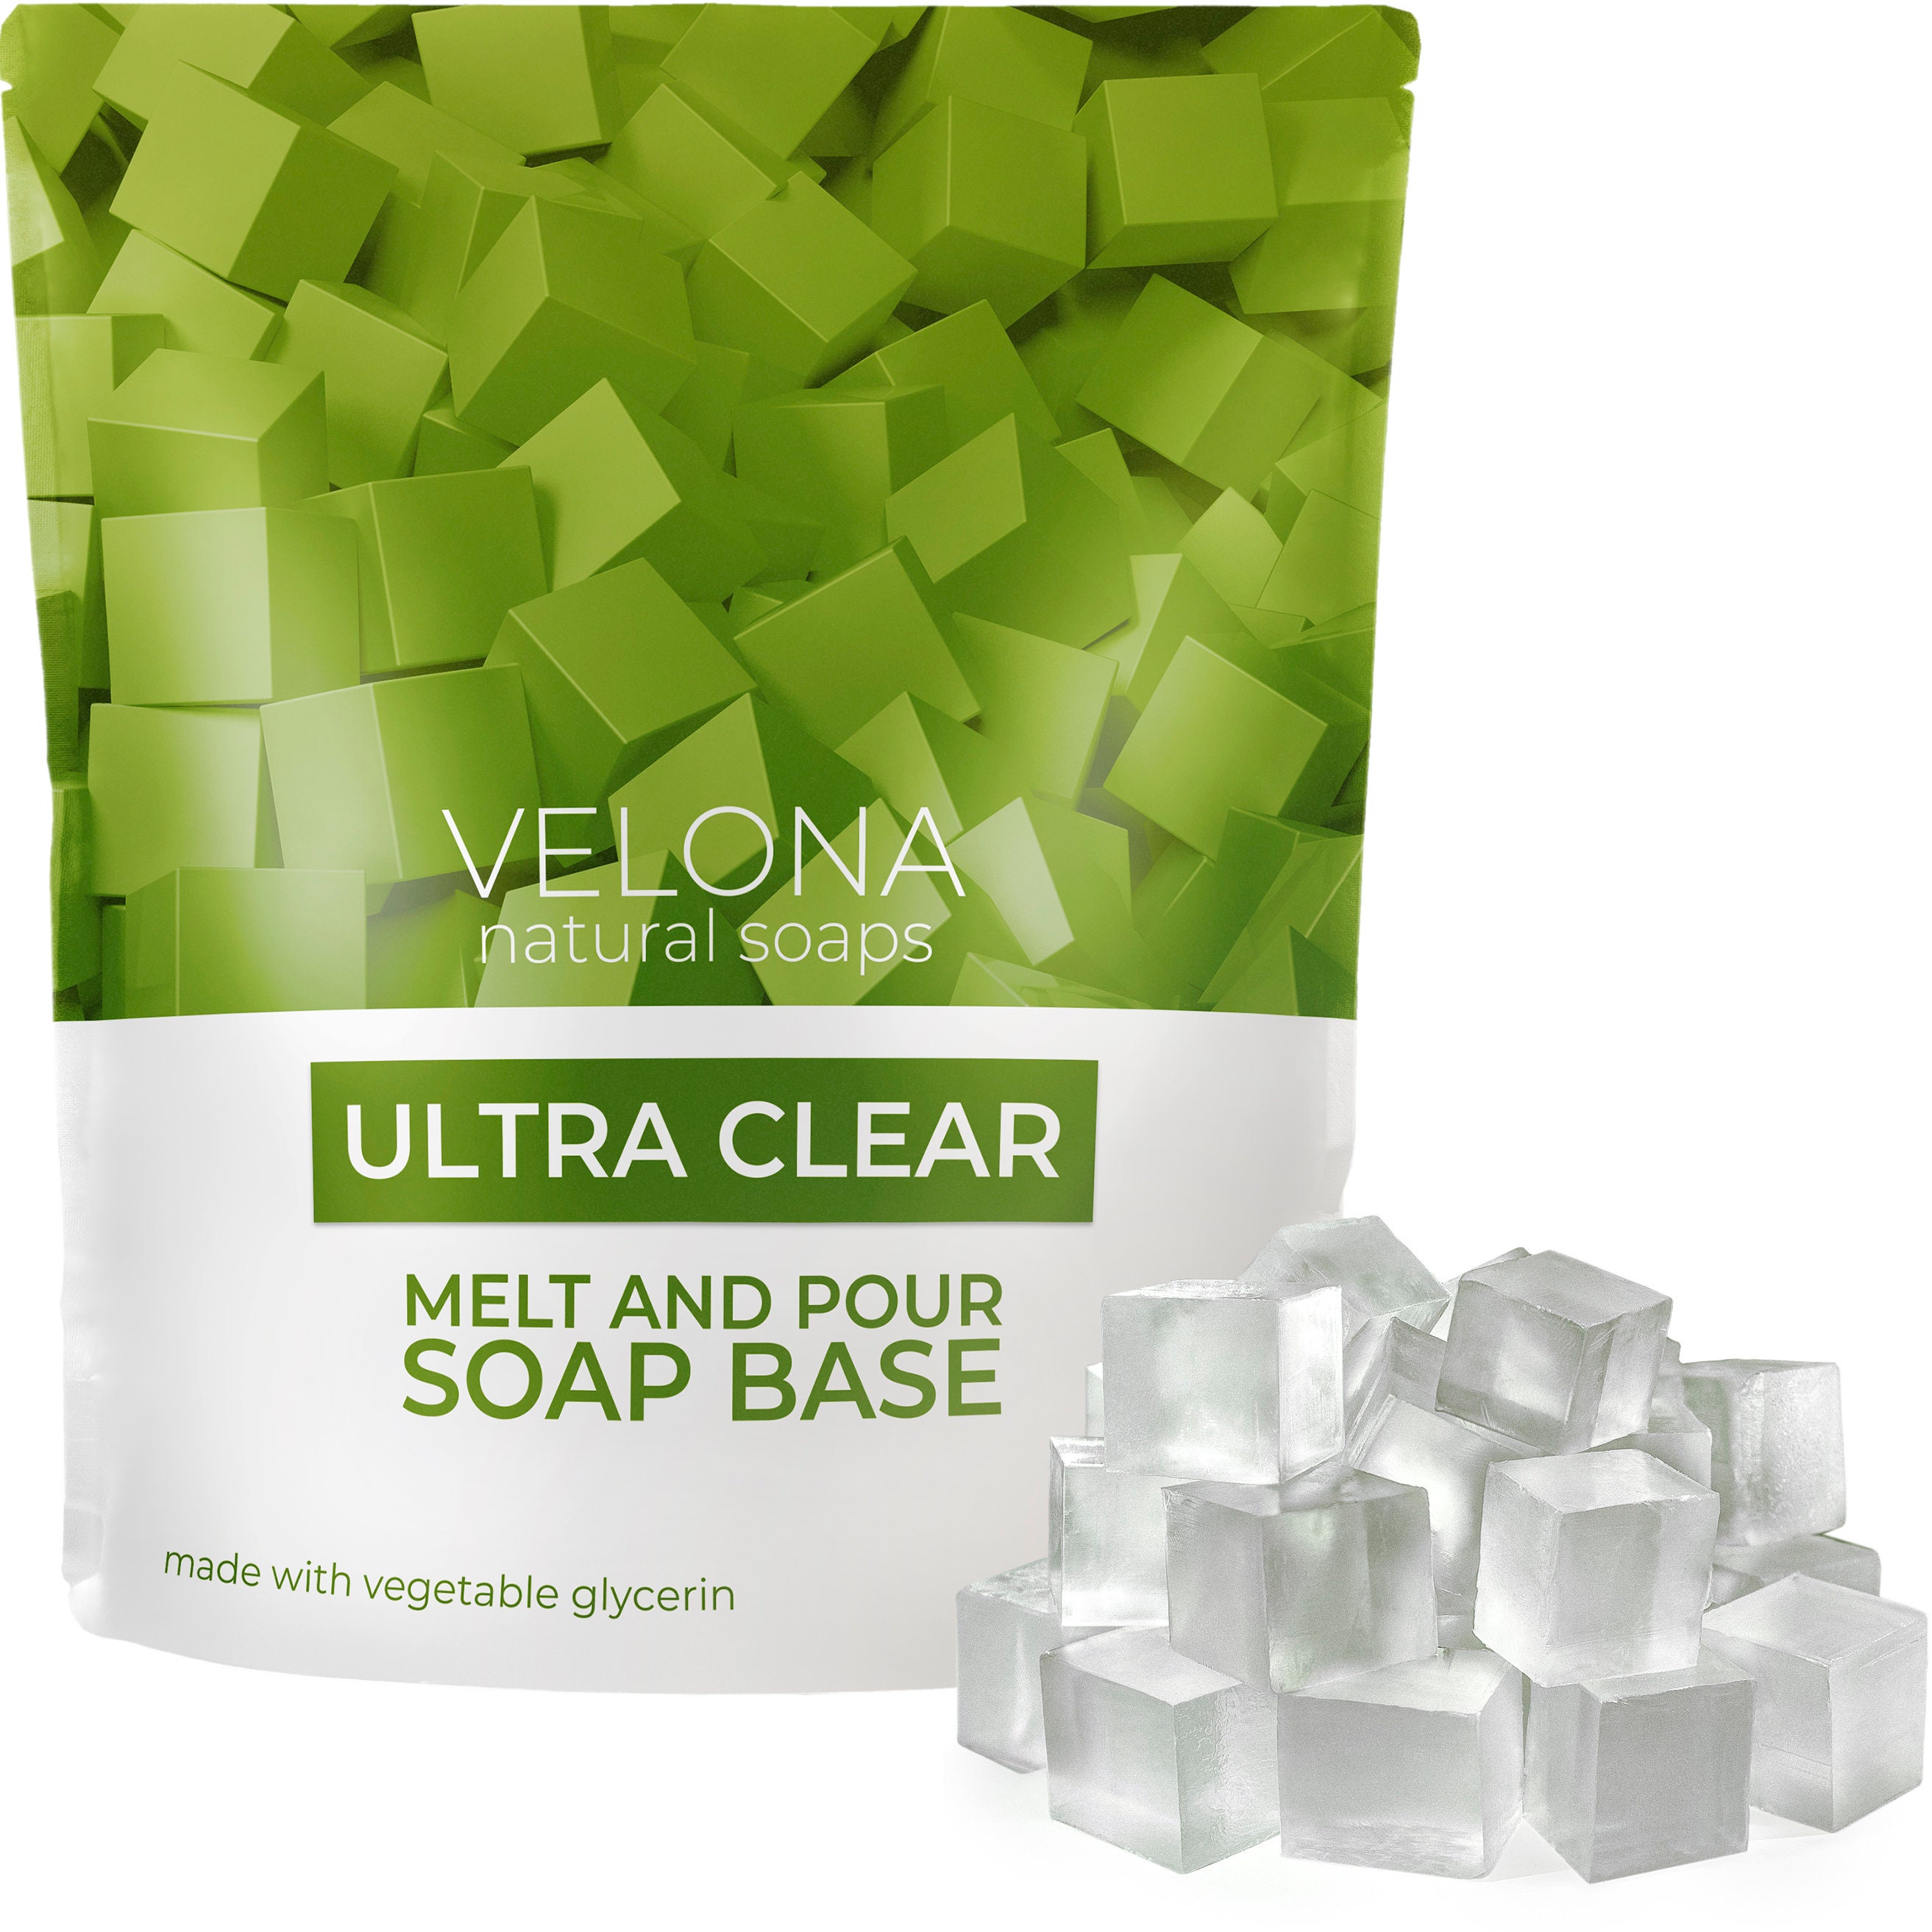 Velona 2 lb - Ultra Clear Glycerin Soap Base Pre-Cut Cubes | SLS/SLES Free | Melt and Pour | Transparent Natural Bars for The Best Result for